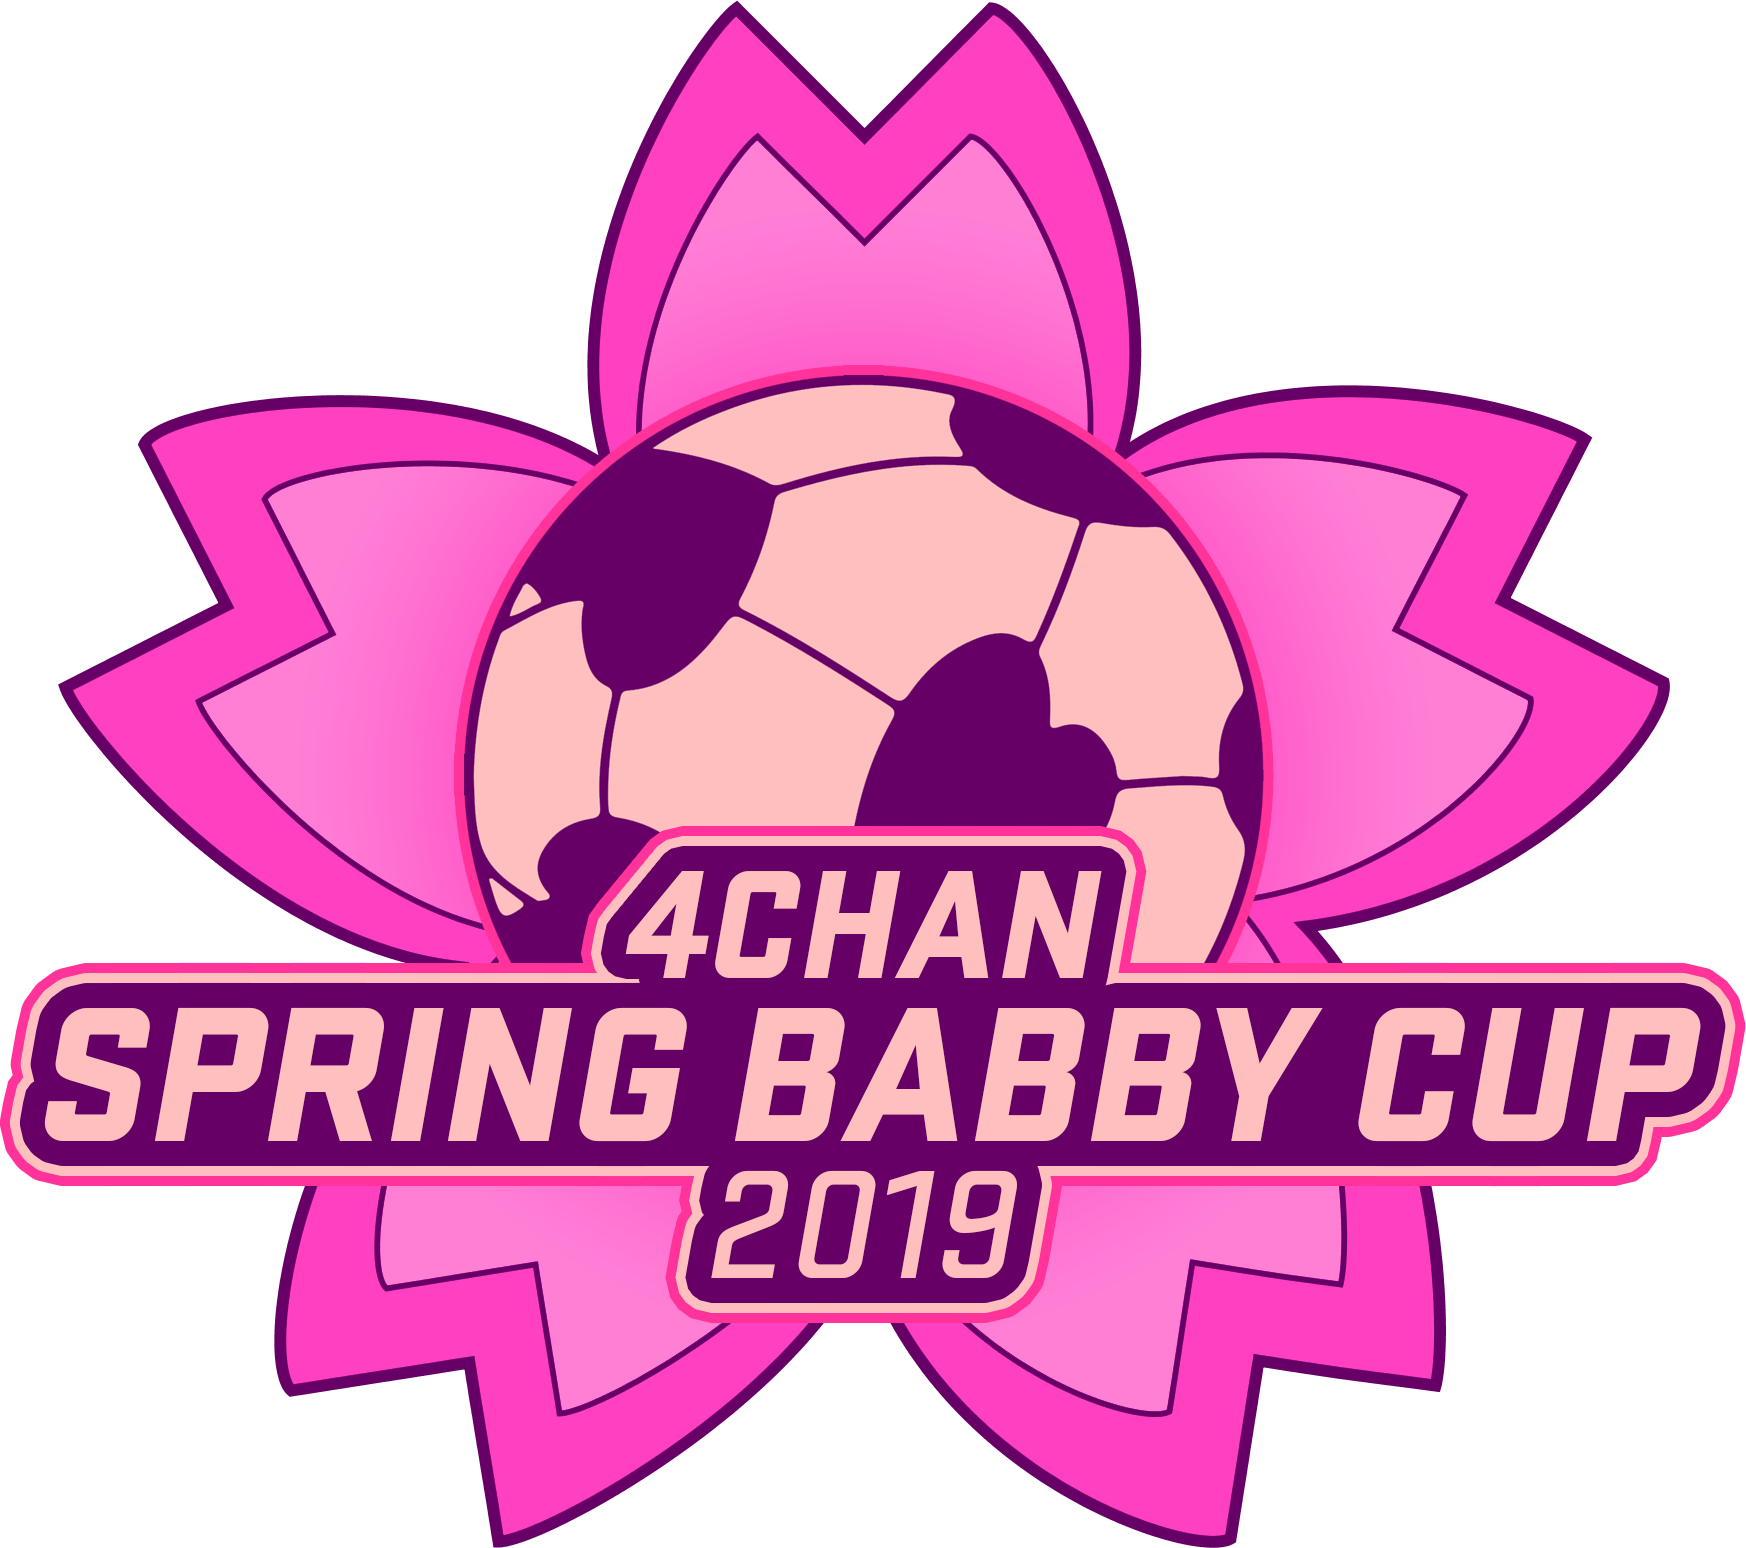 2019 4chan Spring Babby Cup